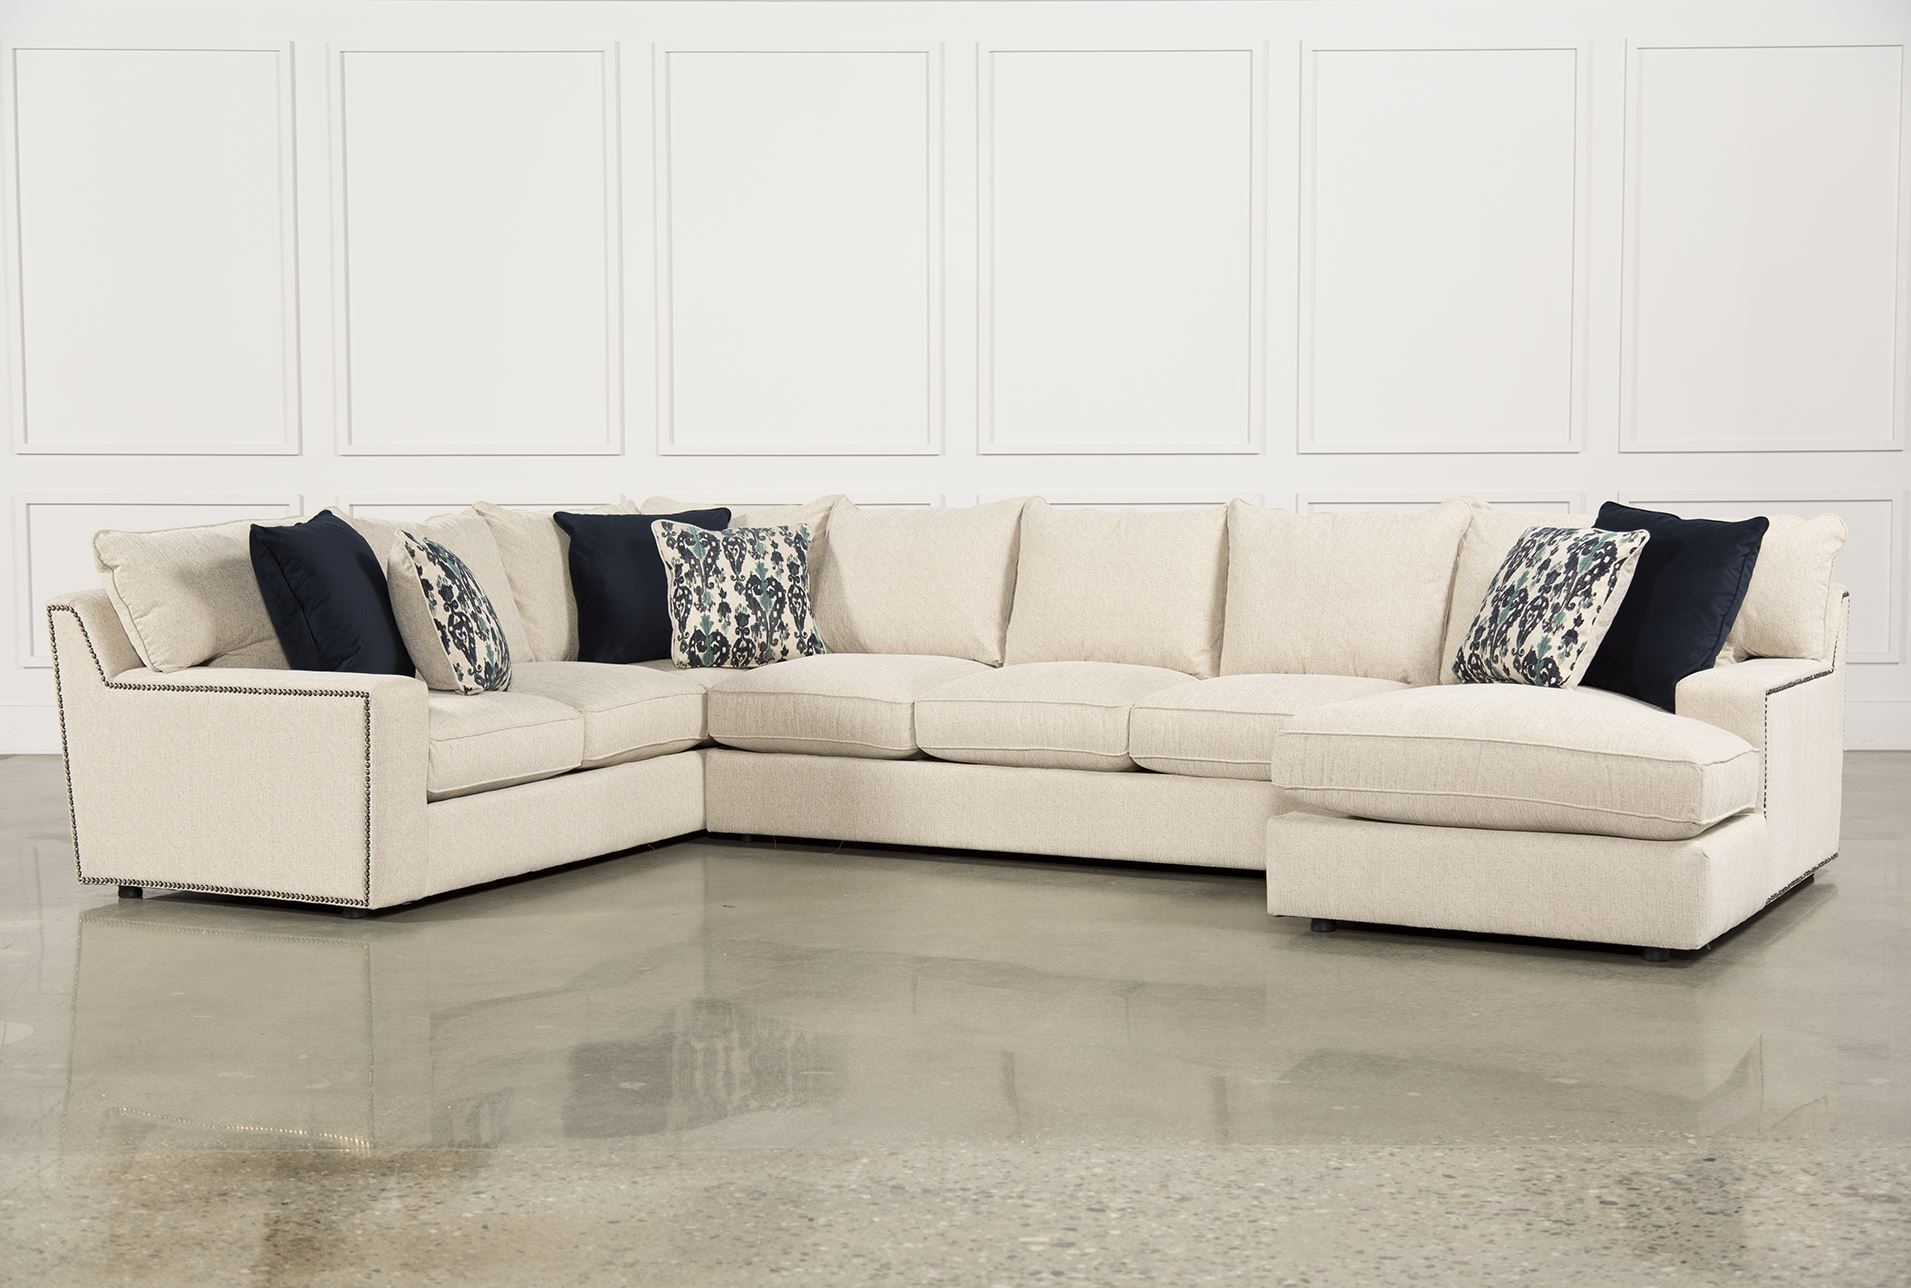 Rennell 3 Piece Sectional W/raf Chaise | Home Decor Spanish / Tuscan Throughout Meyer 3 Piece Sectionals With Raf Chaise (View 6 of 30)